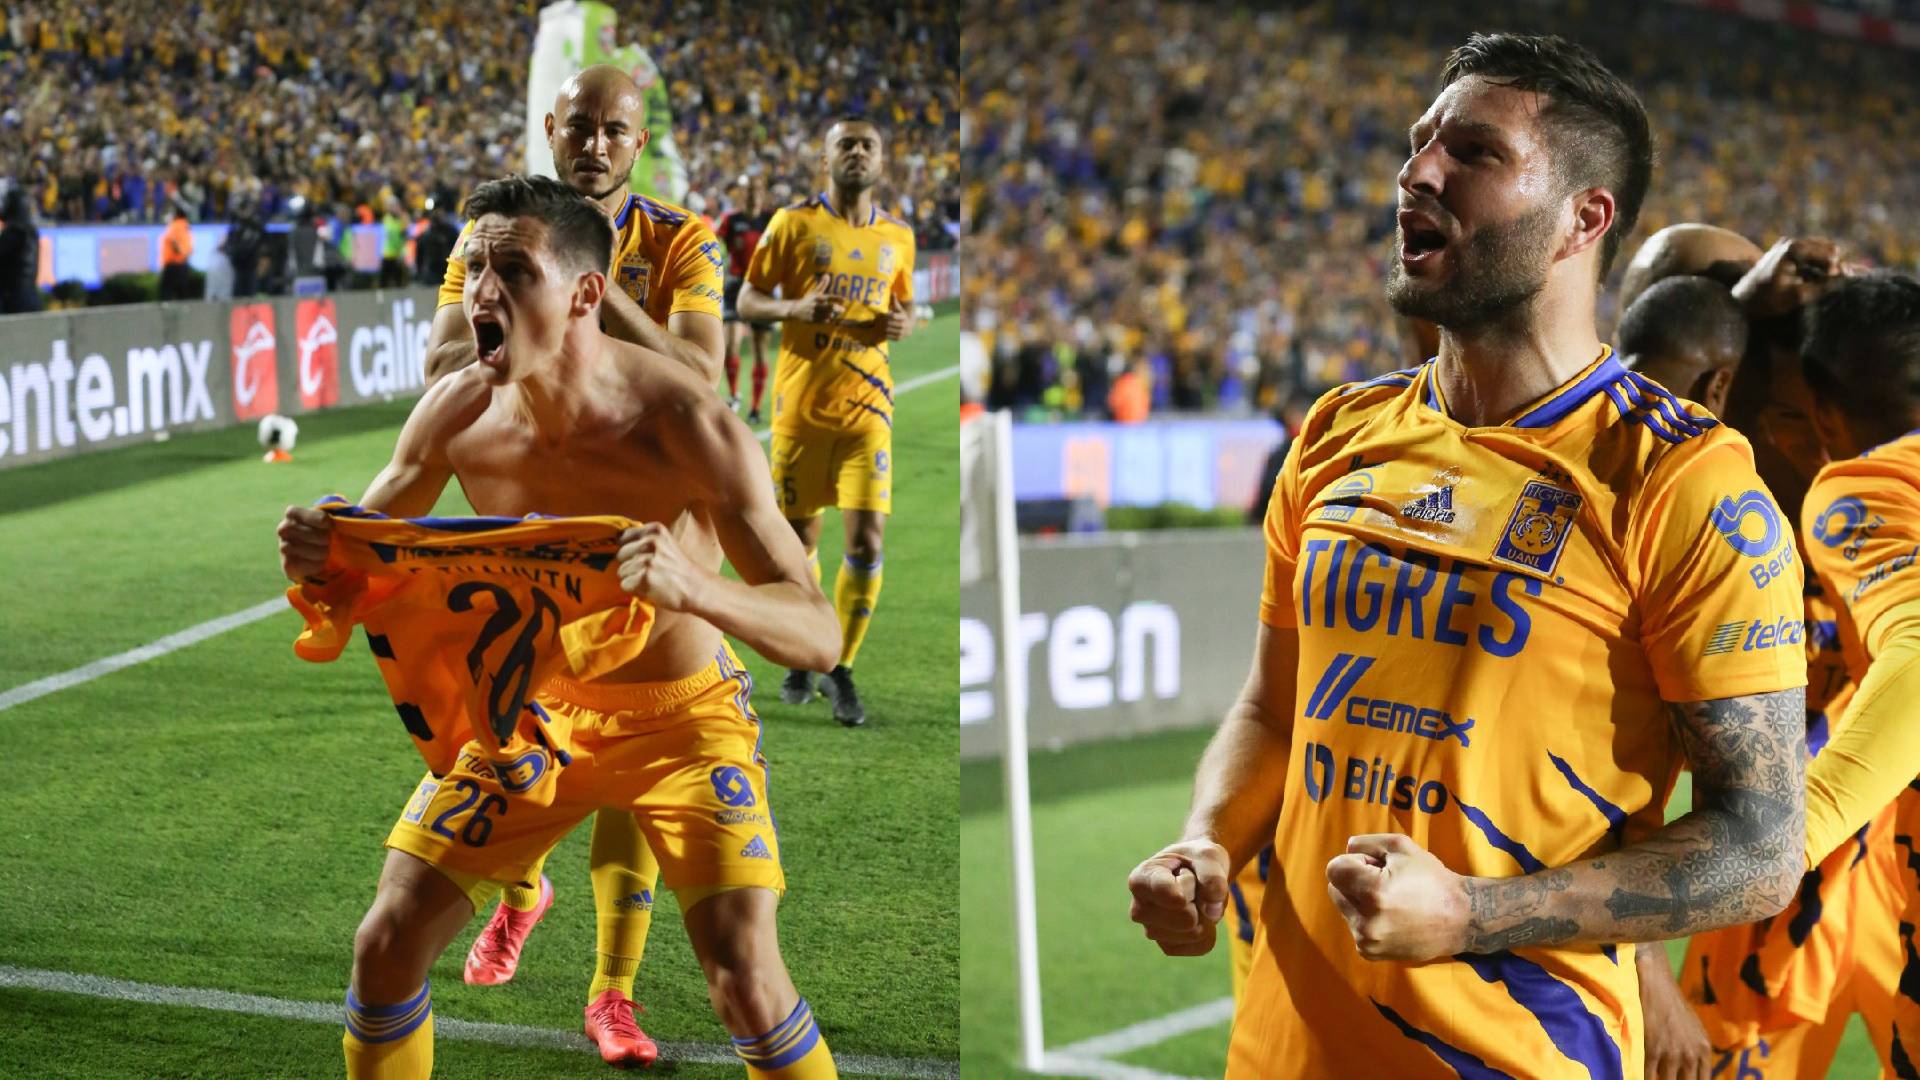 Gignac and Thauvin are the highest paid players in Mexico (Photo: Twitter/@TigresOficial)